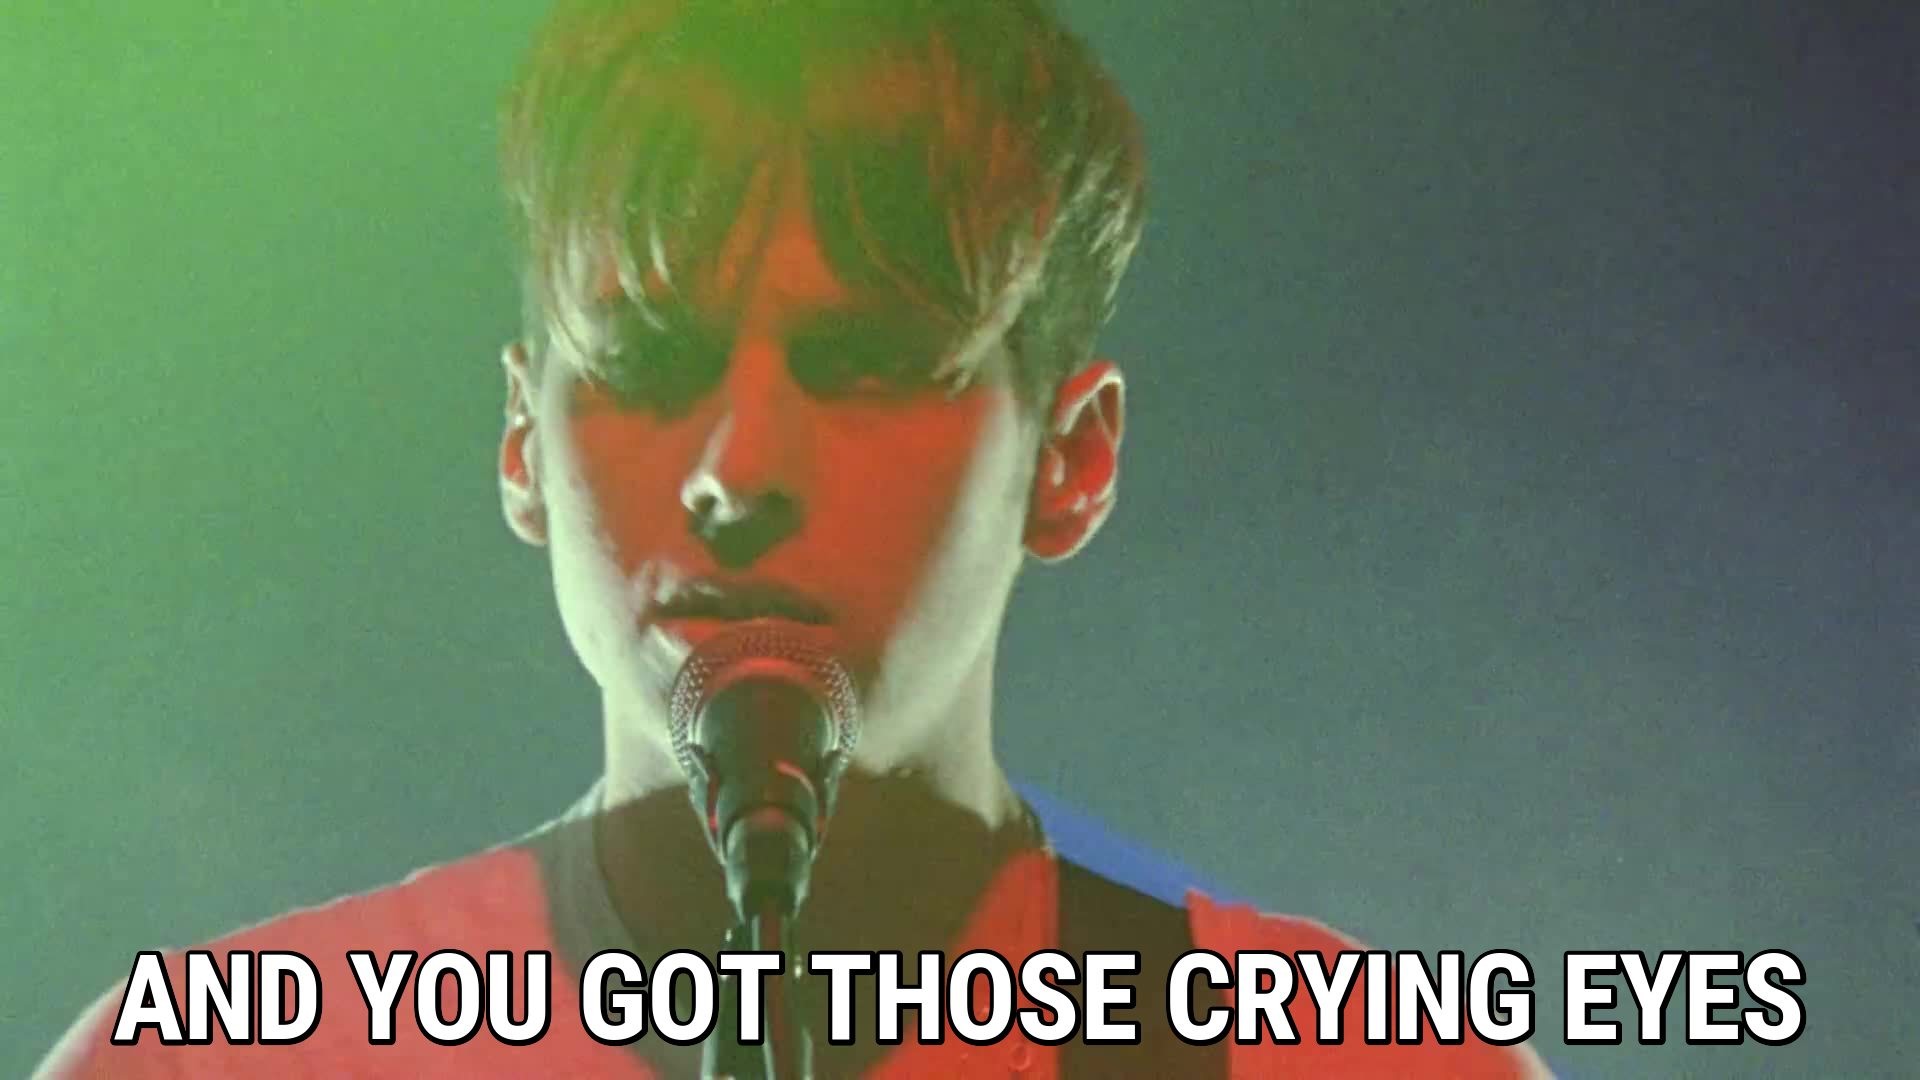 1920x1080 ... Foster the People And you got those crying eyes